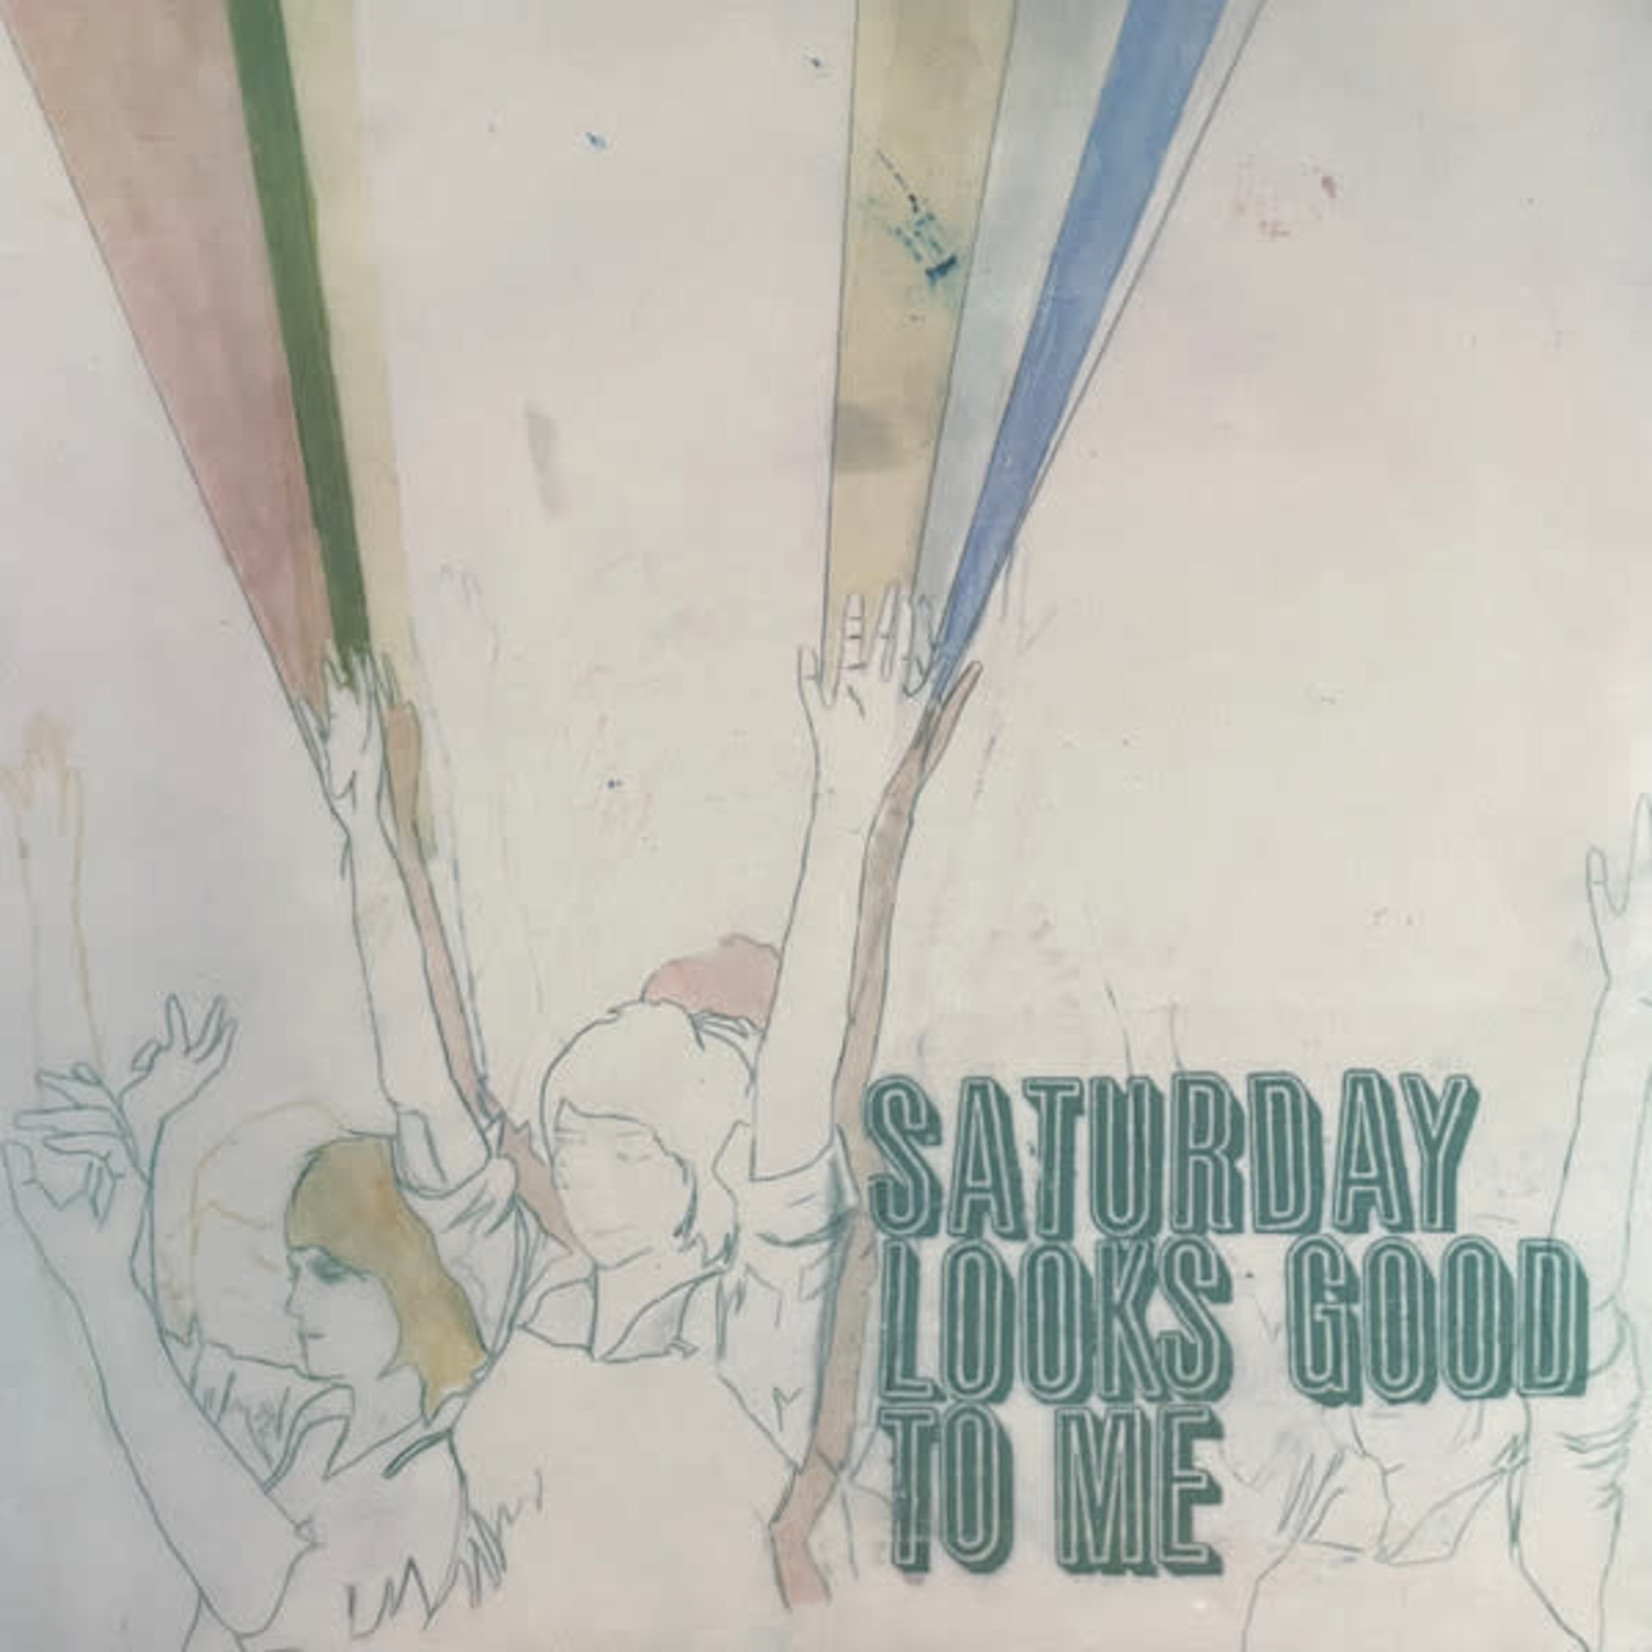 K Saturday Looks Good To Me - Fill Up The Room (LP)